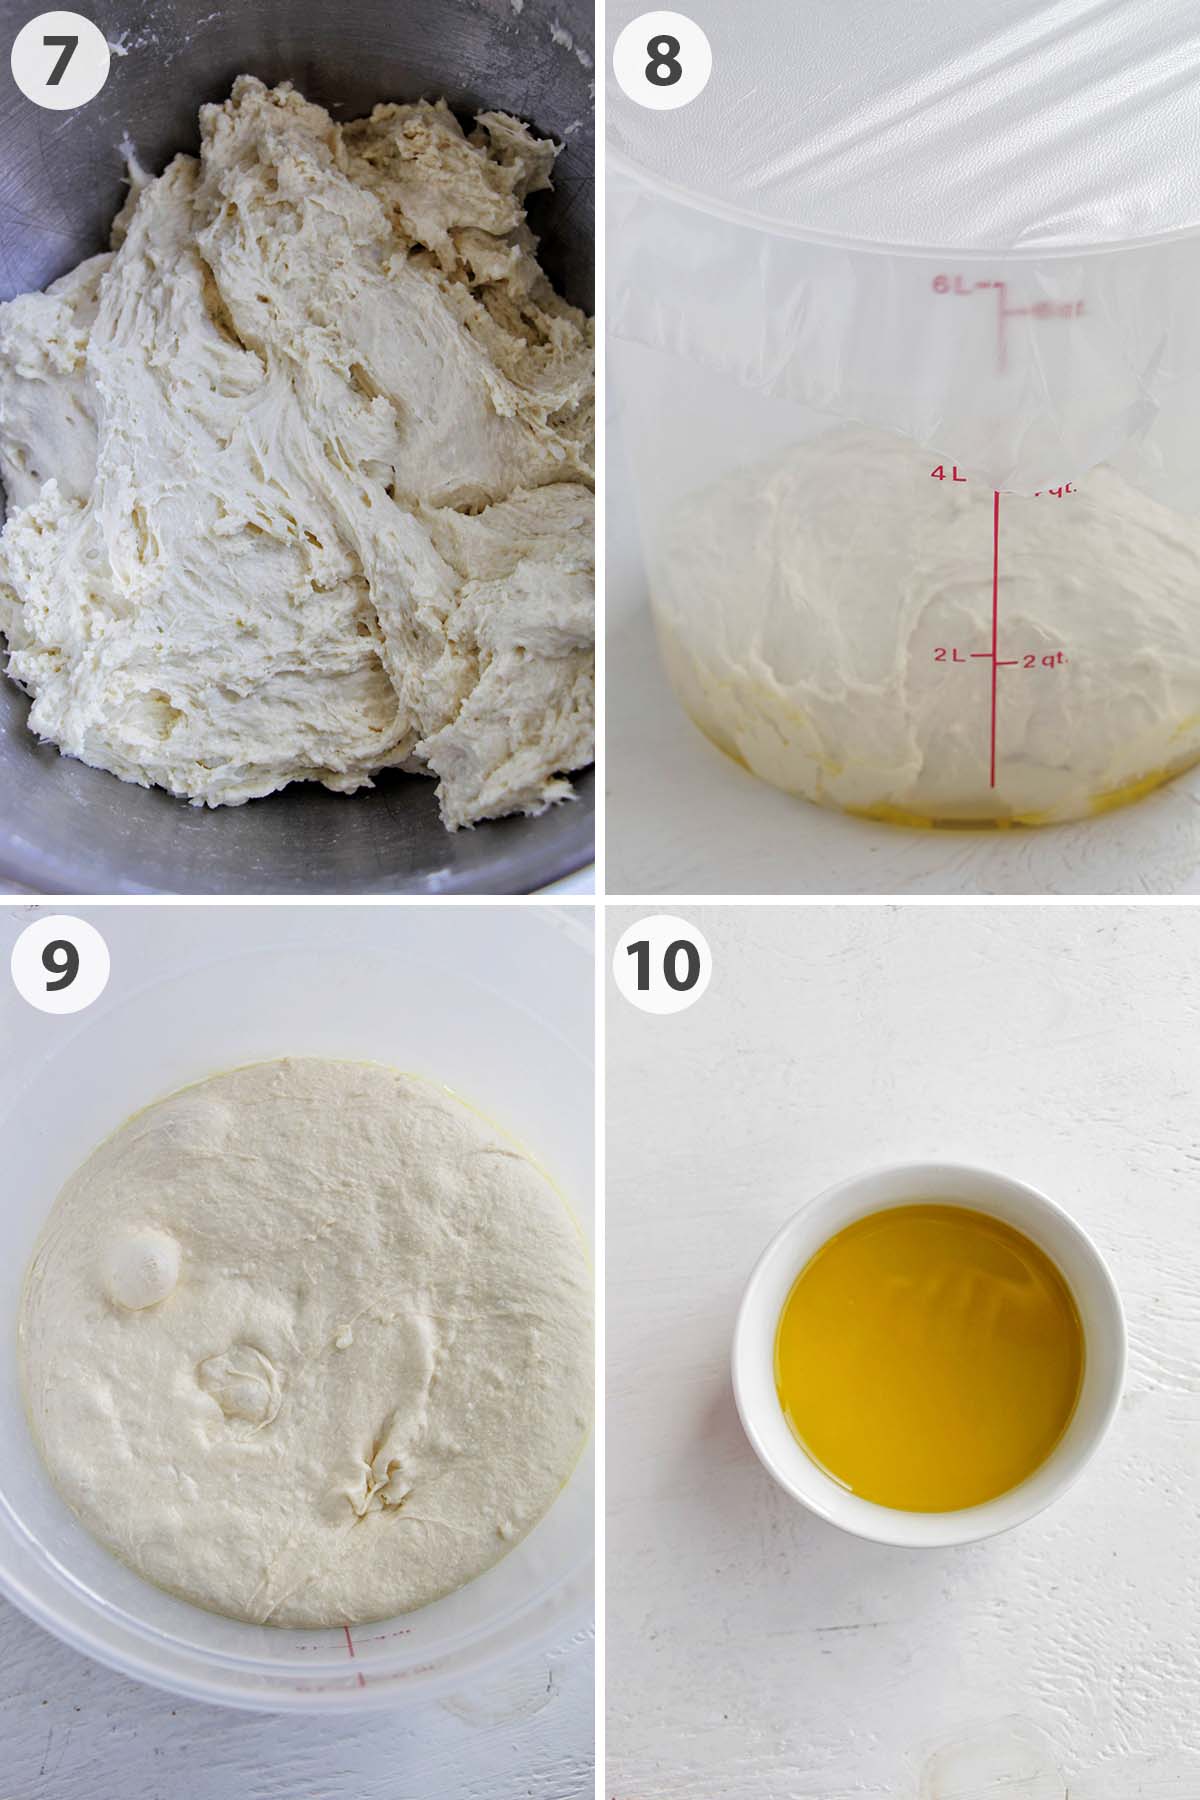 four numbered photos showing how to ferment focaccia barese dough and make olive oil topping.